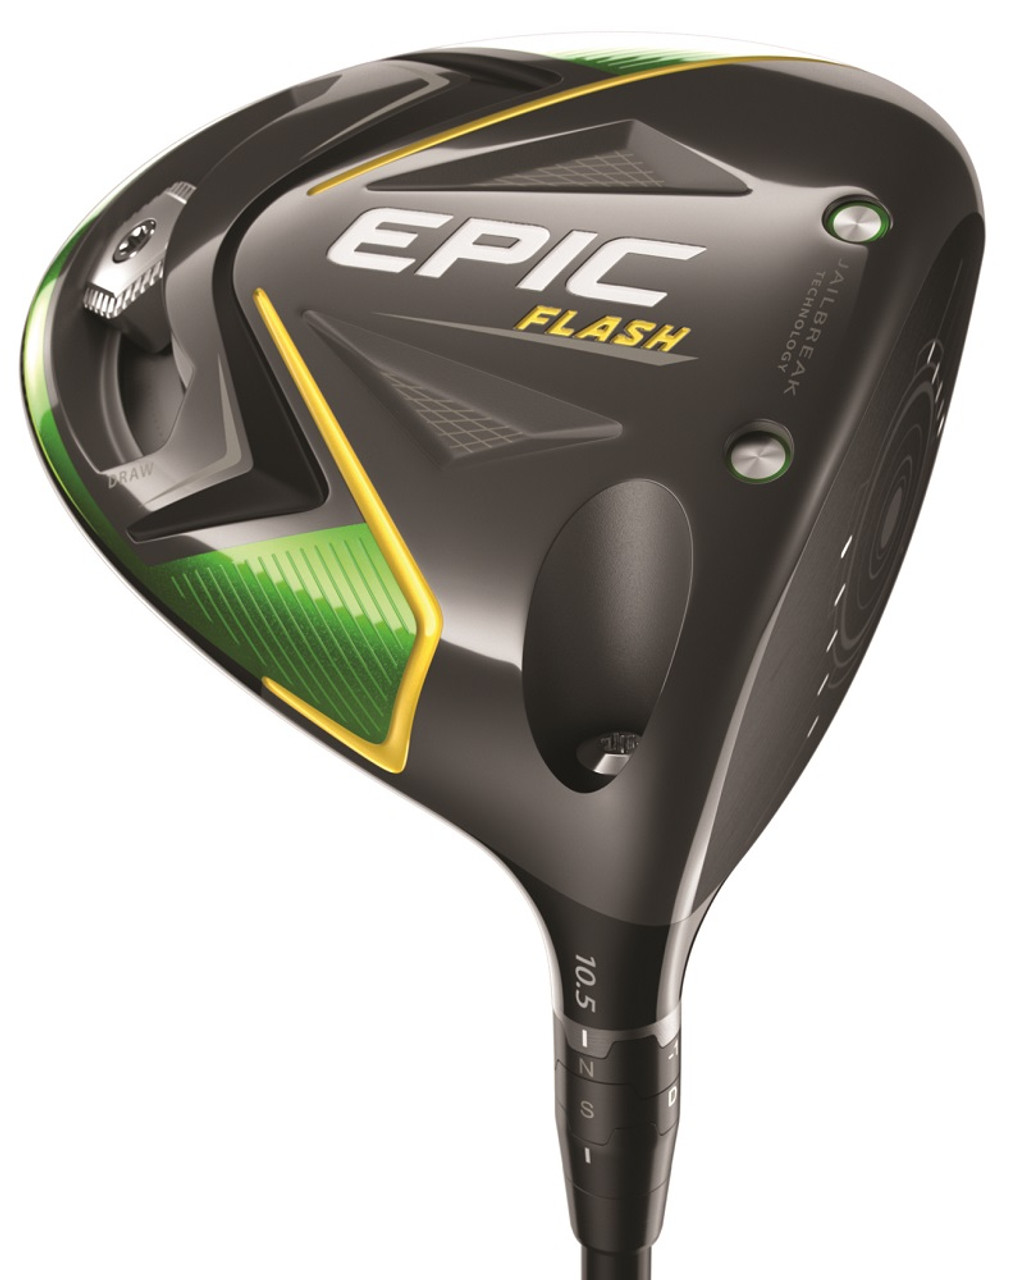 Pre-Owned Callaway Golf Epic Flash Driver | RockBottomGolf.com